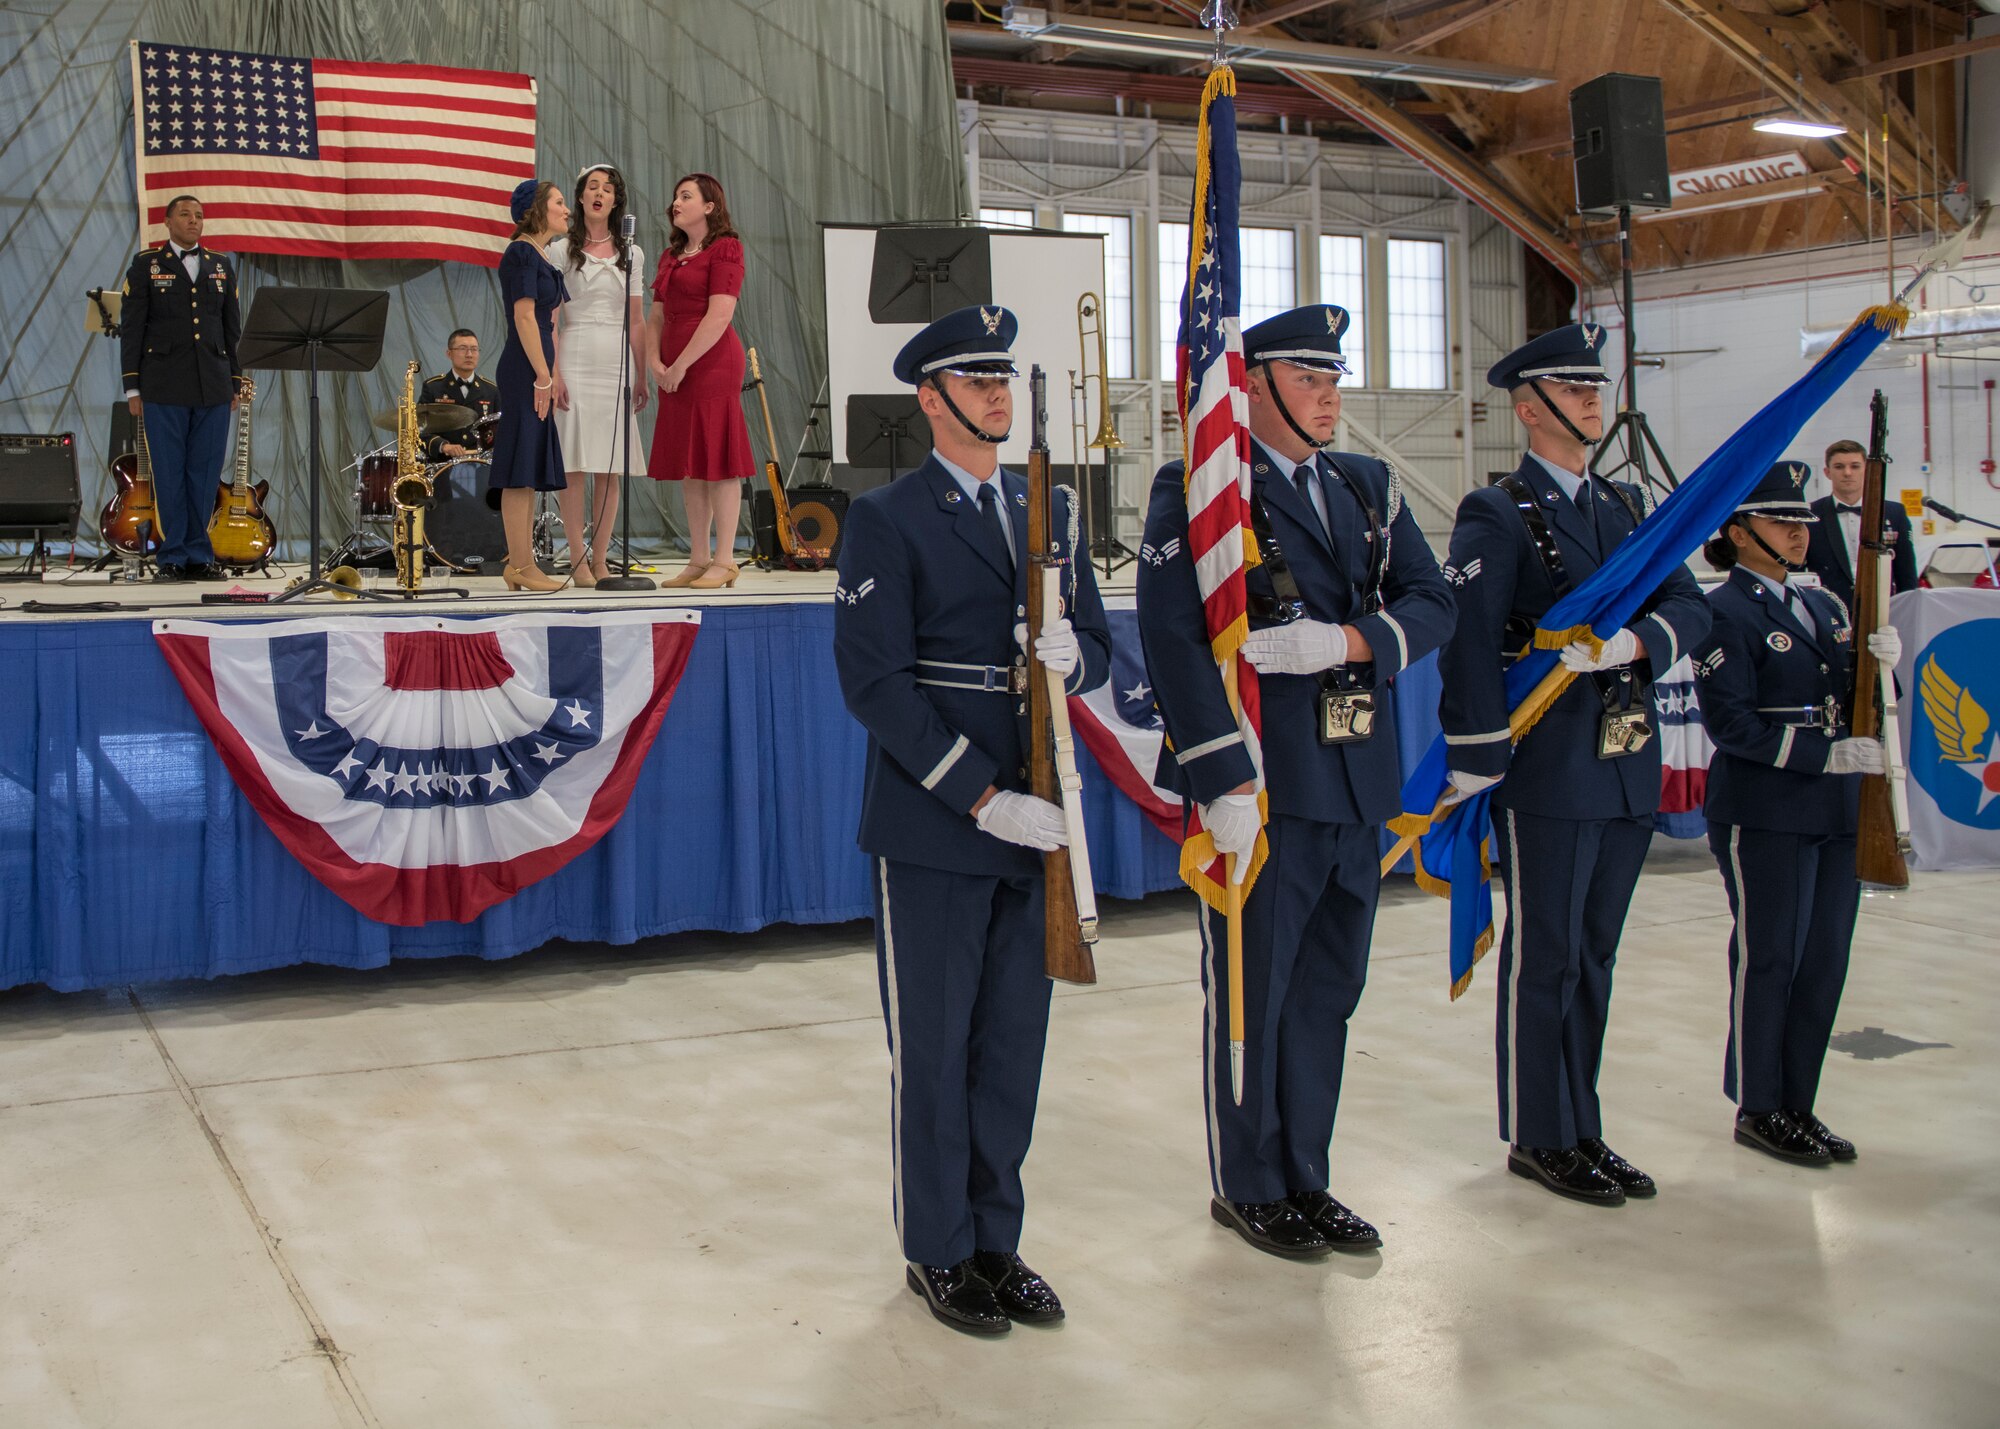 Chloe Hagener, Hilary Marshall and Katie Babbitt (left to right), vocalists from the local community theater, sing the National Anthem at the Air Force Ball, Sept. 14, 2019, on Holloman Air Force Base, N.M. Every September, the Air Force Ball is celebrated by bases all over the world to commemorate the day the United States Air Force was established: Sept. 18, 1947. (U.S. Air Force photo by Airman 1st Class Kindra Stewart)